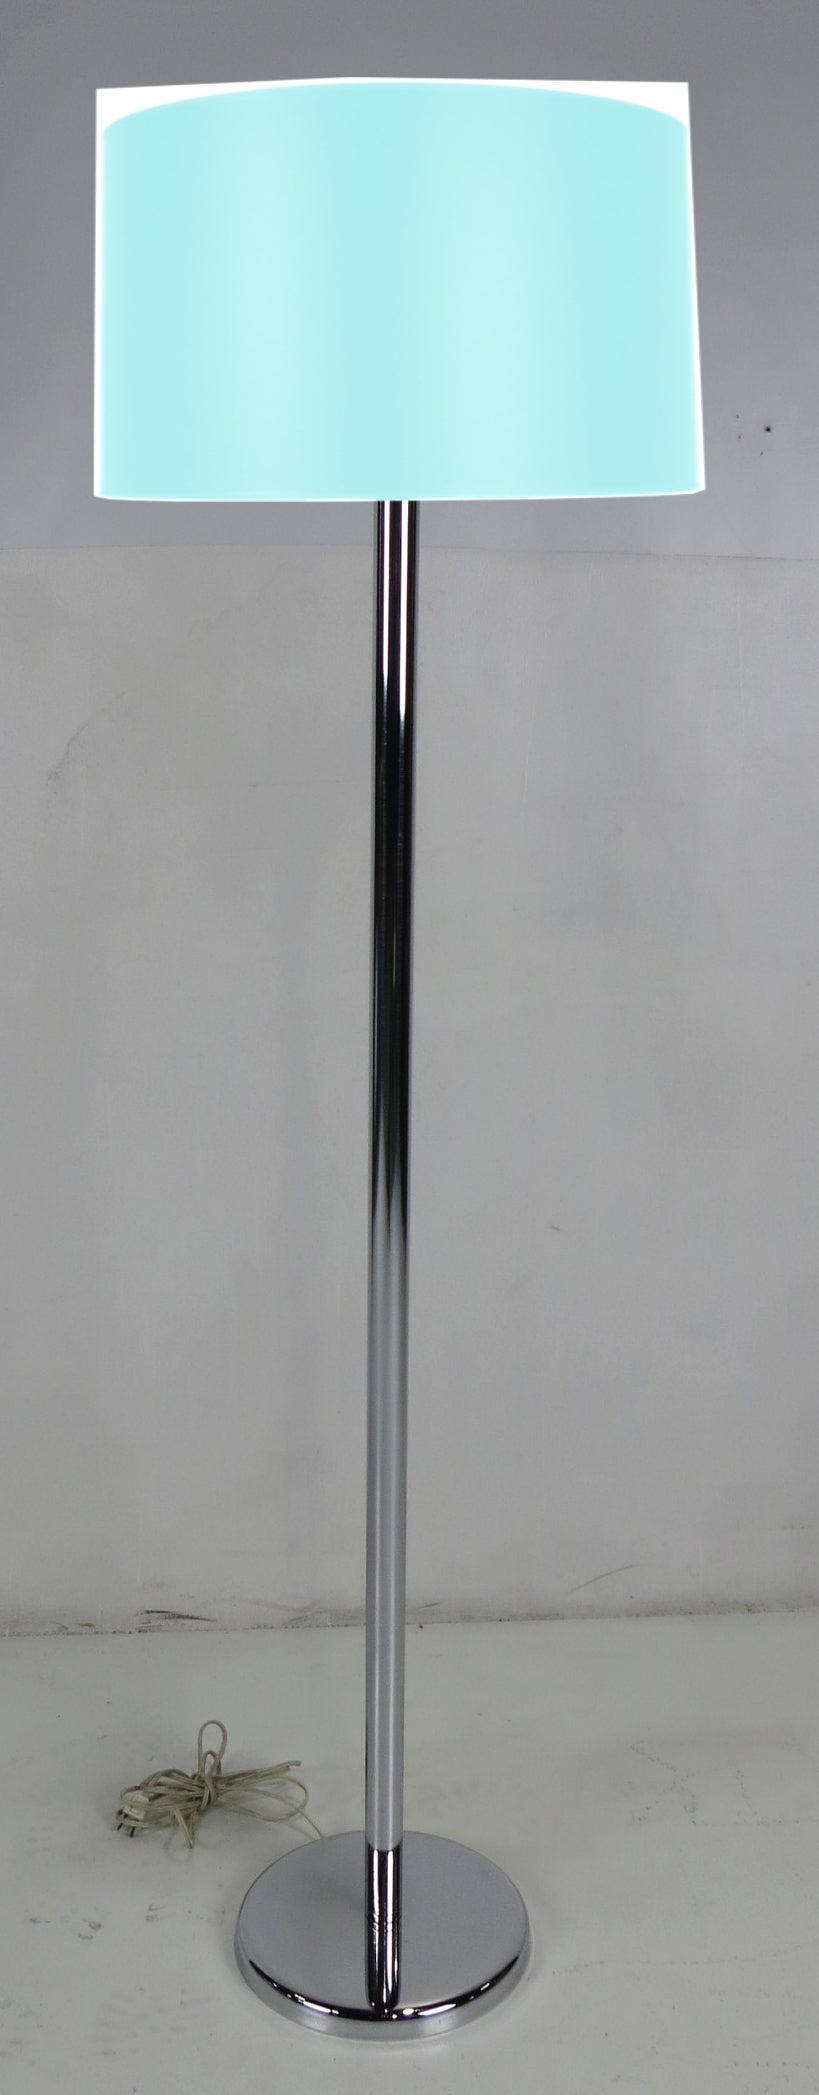 Vintage chrome floor lamp with a unique five socket cluster. The cluster has two-light sockets oriented vertically and a single uplight on top of the cluster. The chrome is in excellent condition with no corrosion or pitting on chrome. Lead weighted